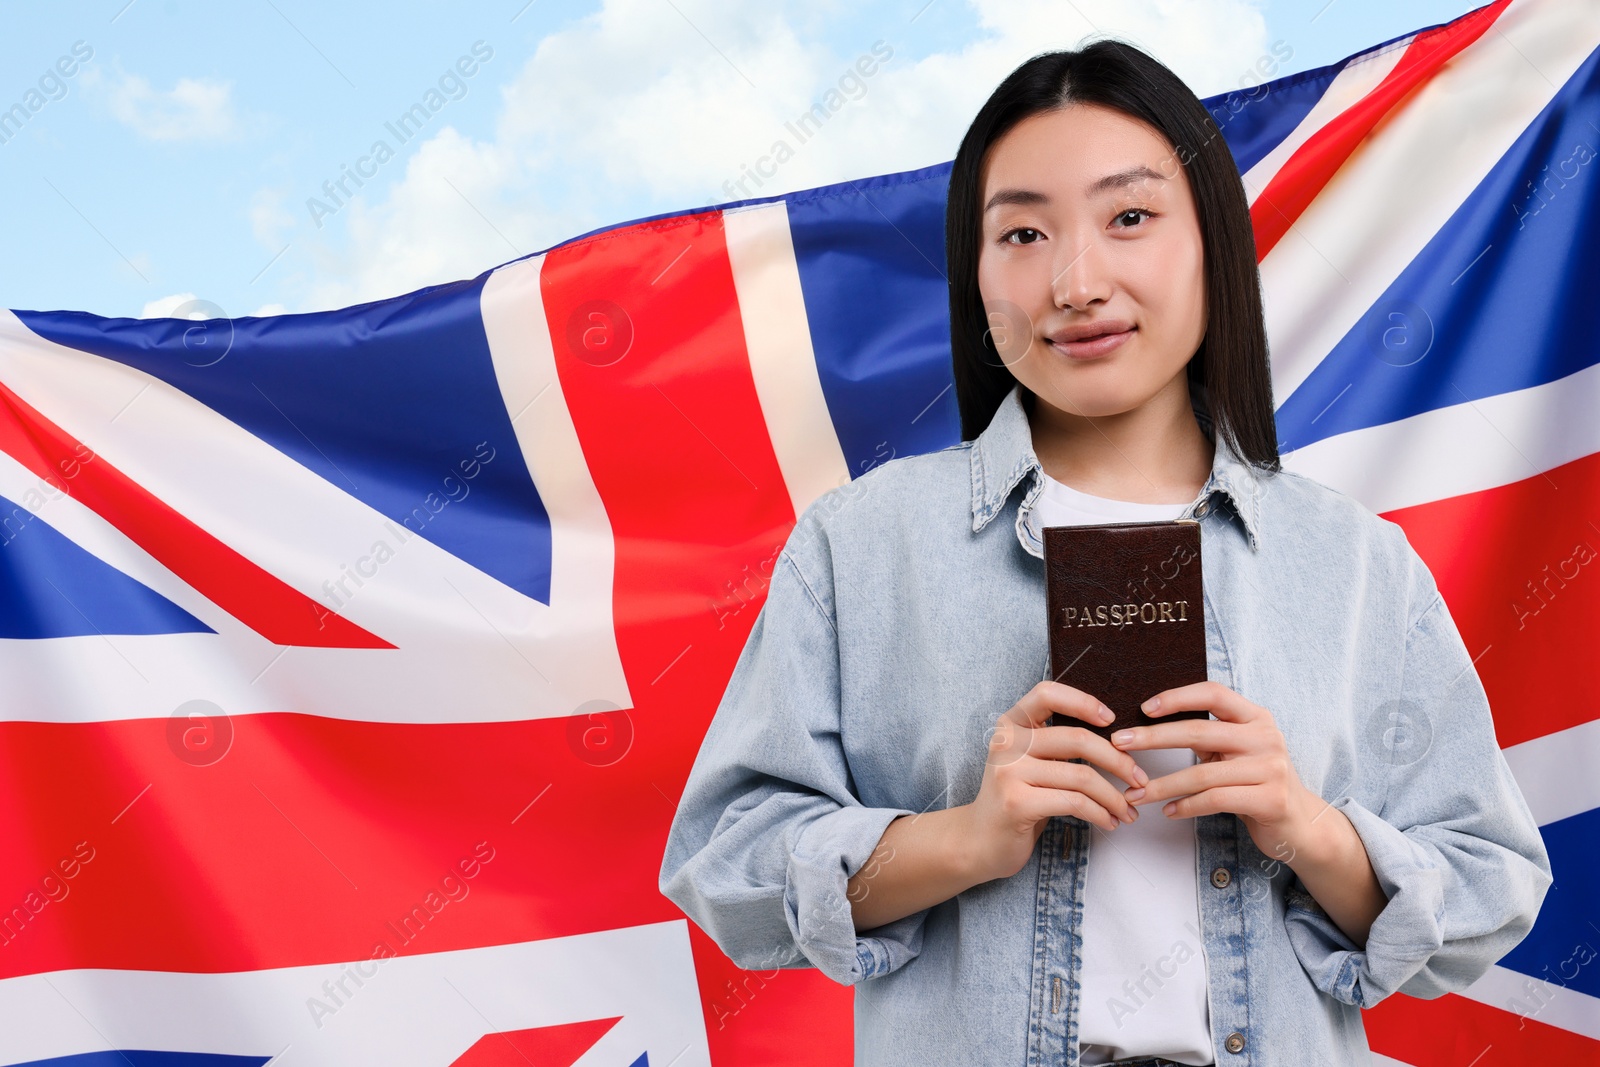 Image of Immigration. Woman with passport and national flag of United Kingdom against blue sky, space for text